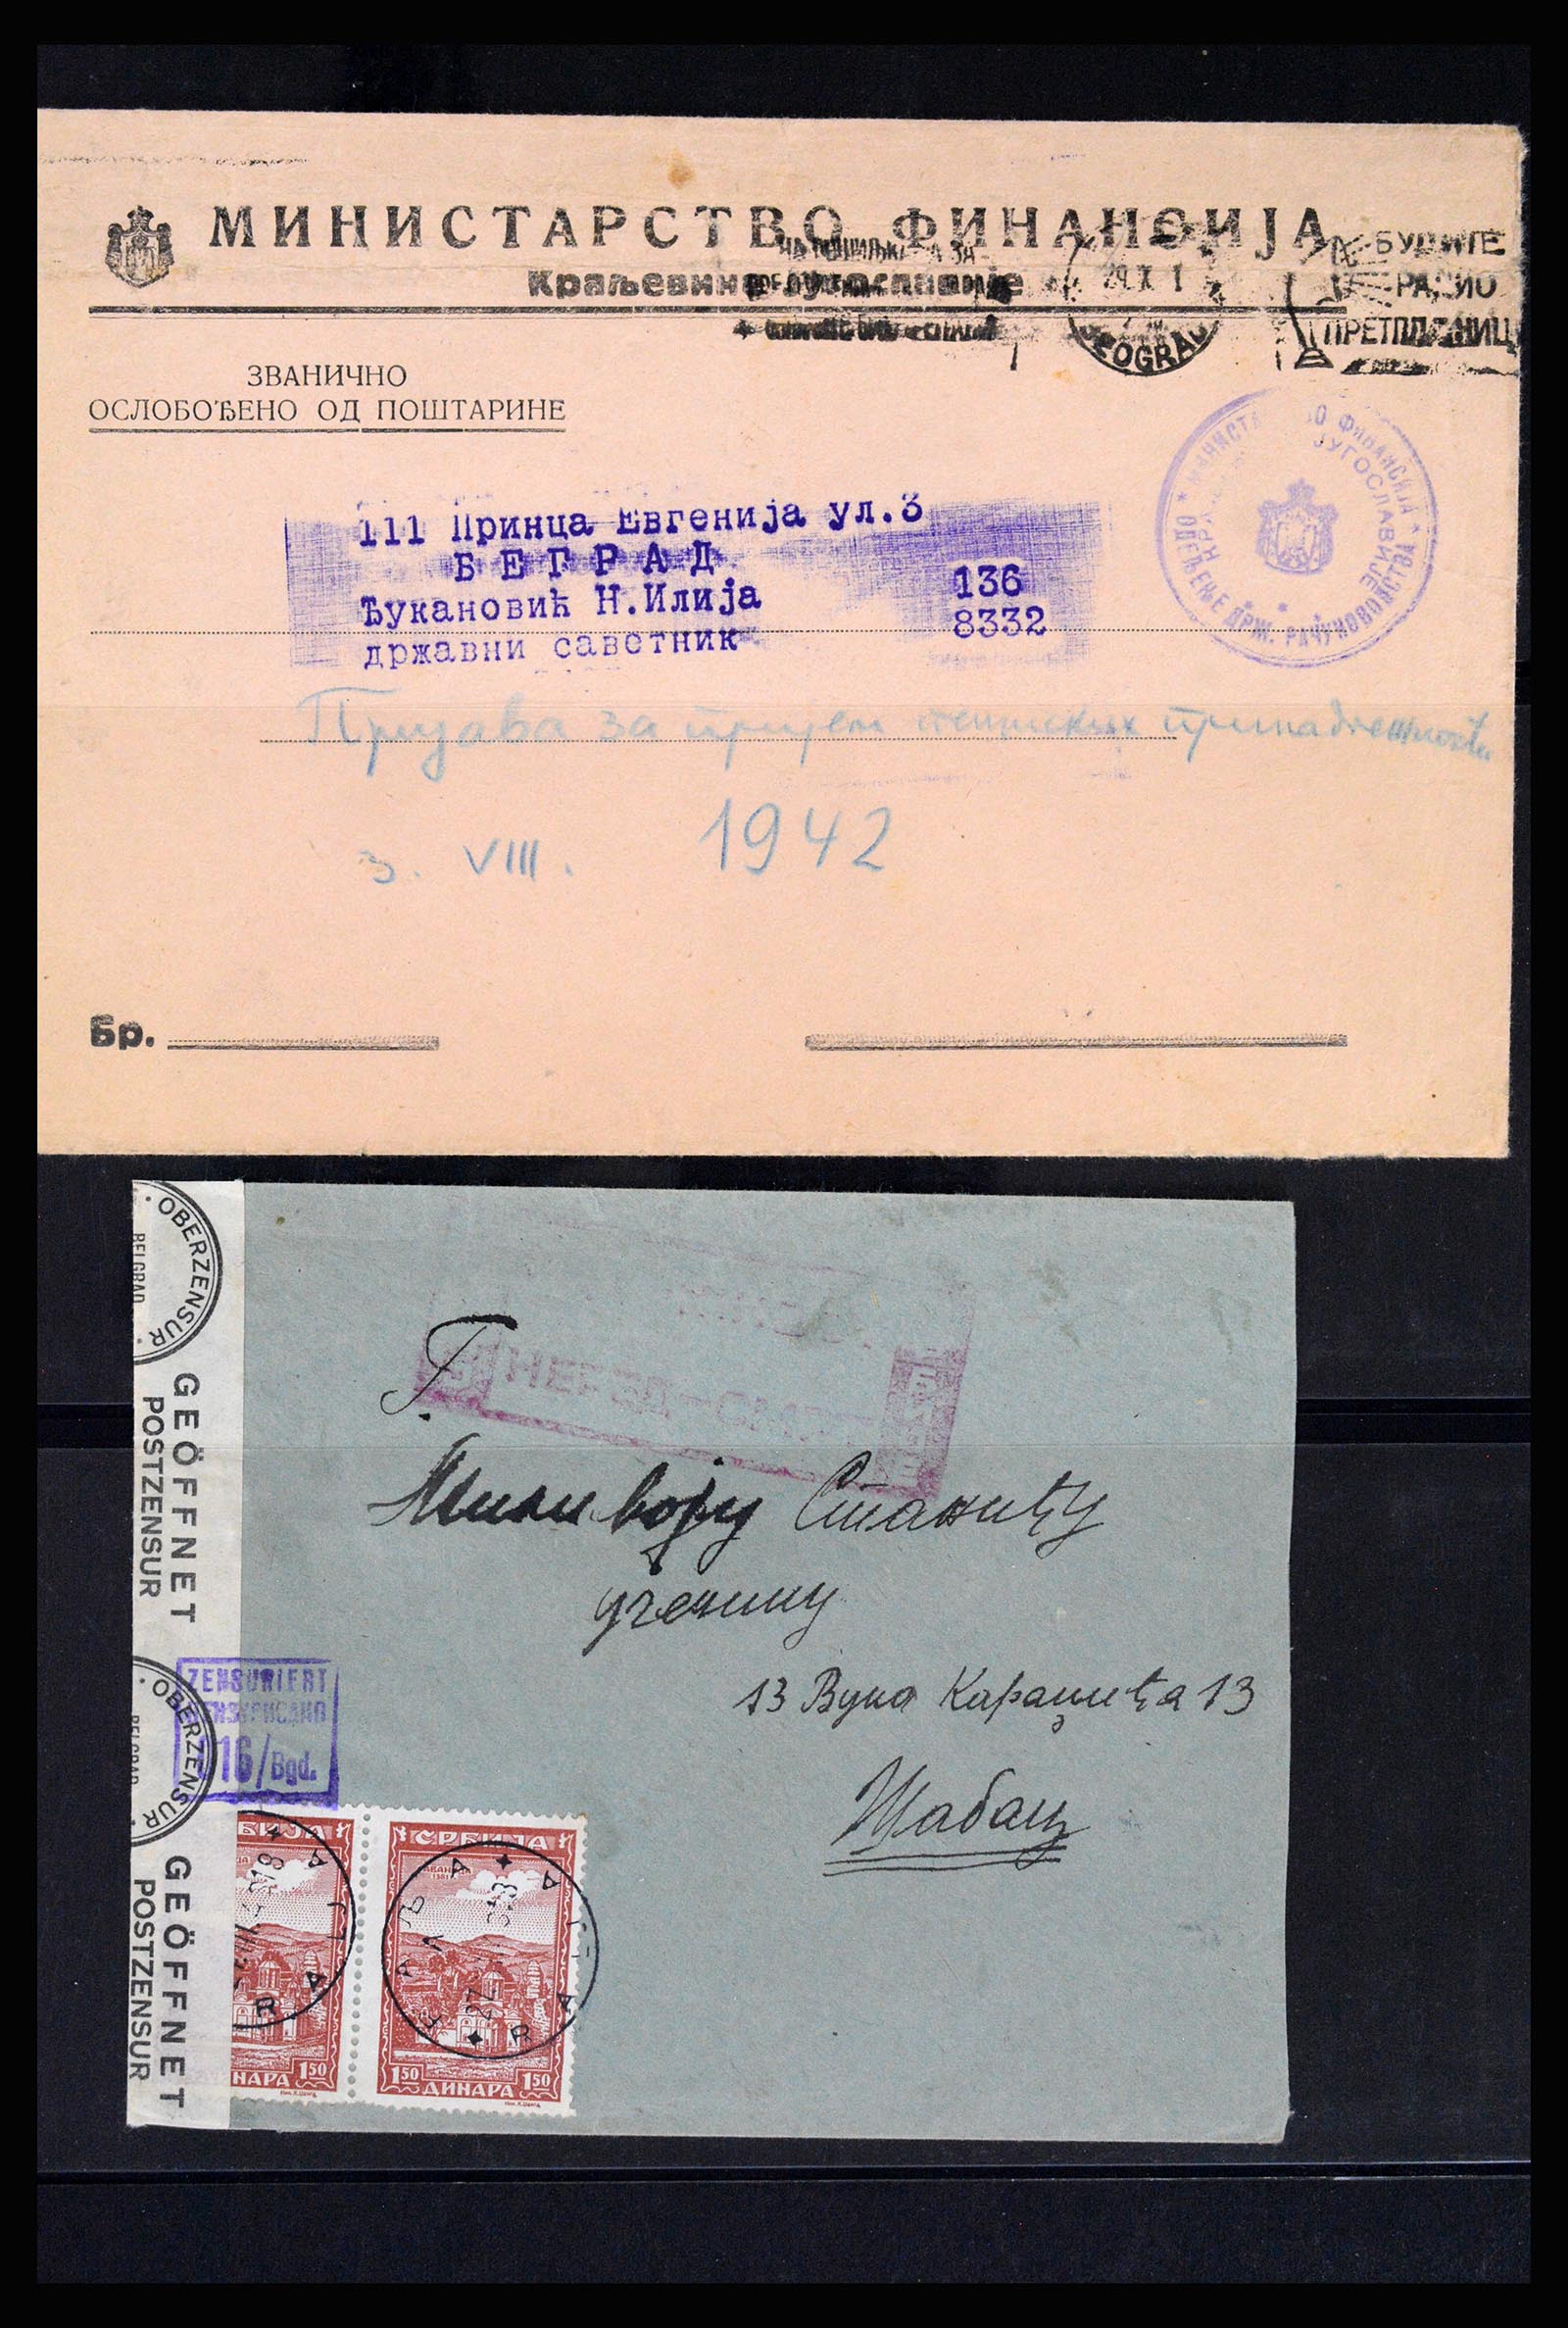 37066 121 - Stamp collection 37066 Serbia covers WW II.